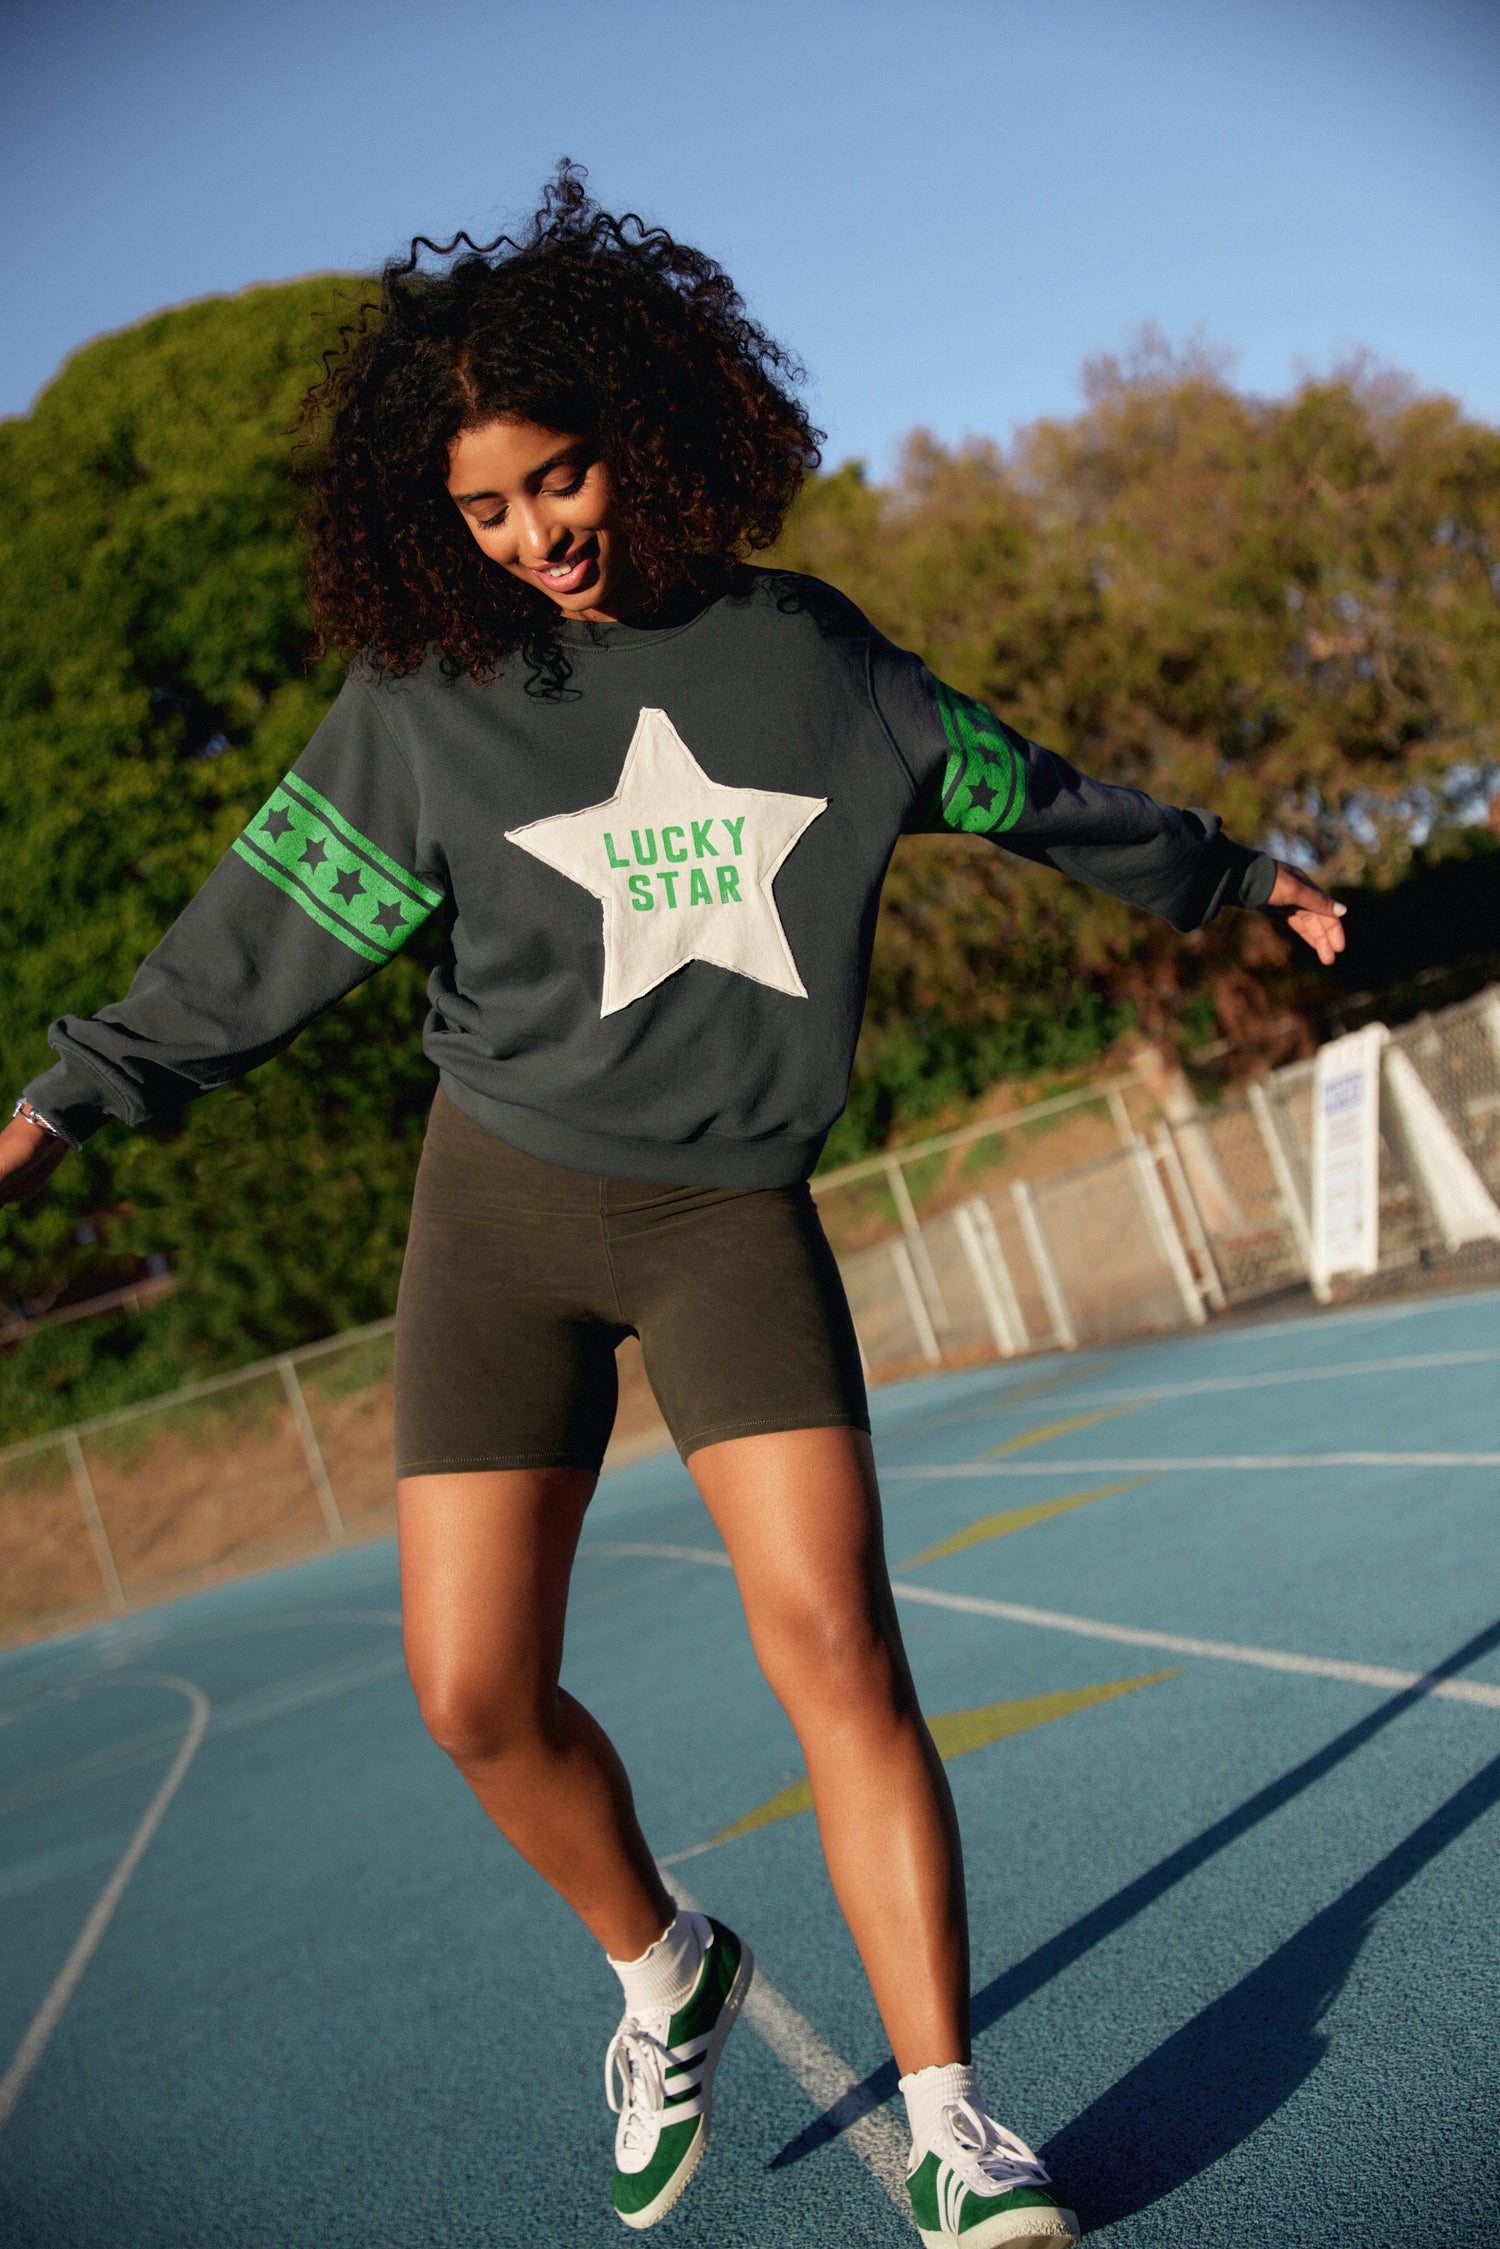 A model featuring a black sweatshirt designed with a  large star in the middle, stamped with "Lucky Star" and green stripes on the sleeves.